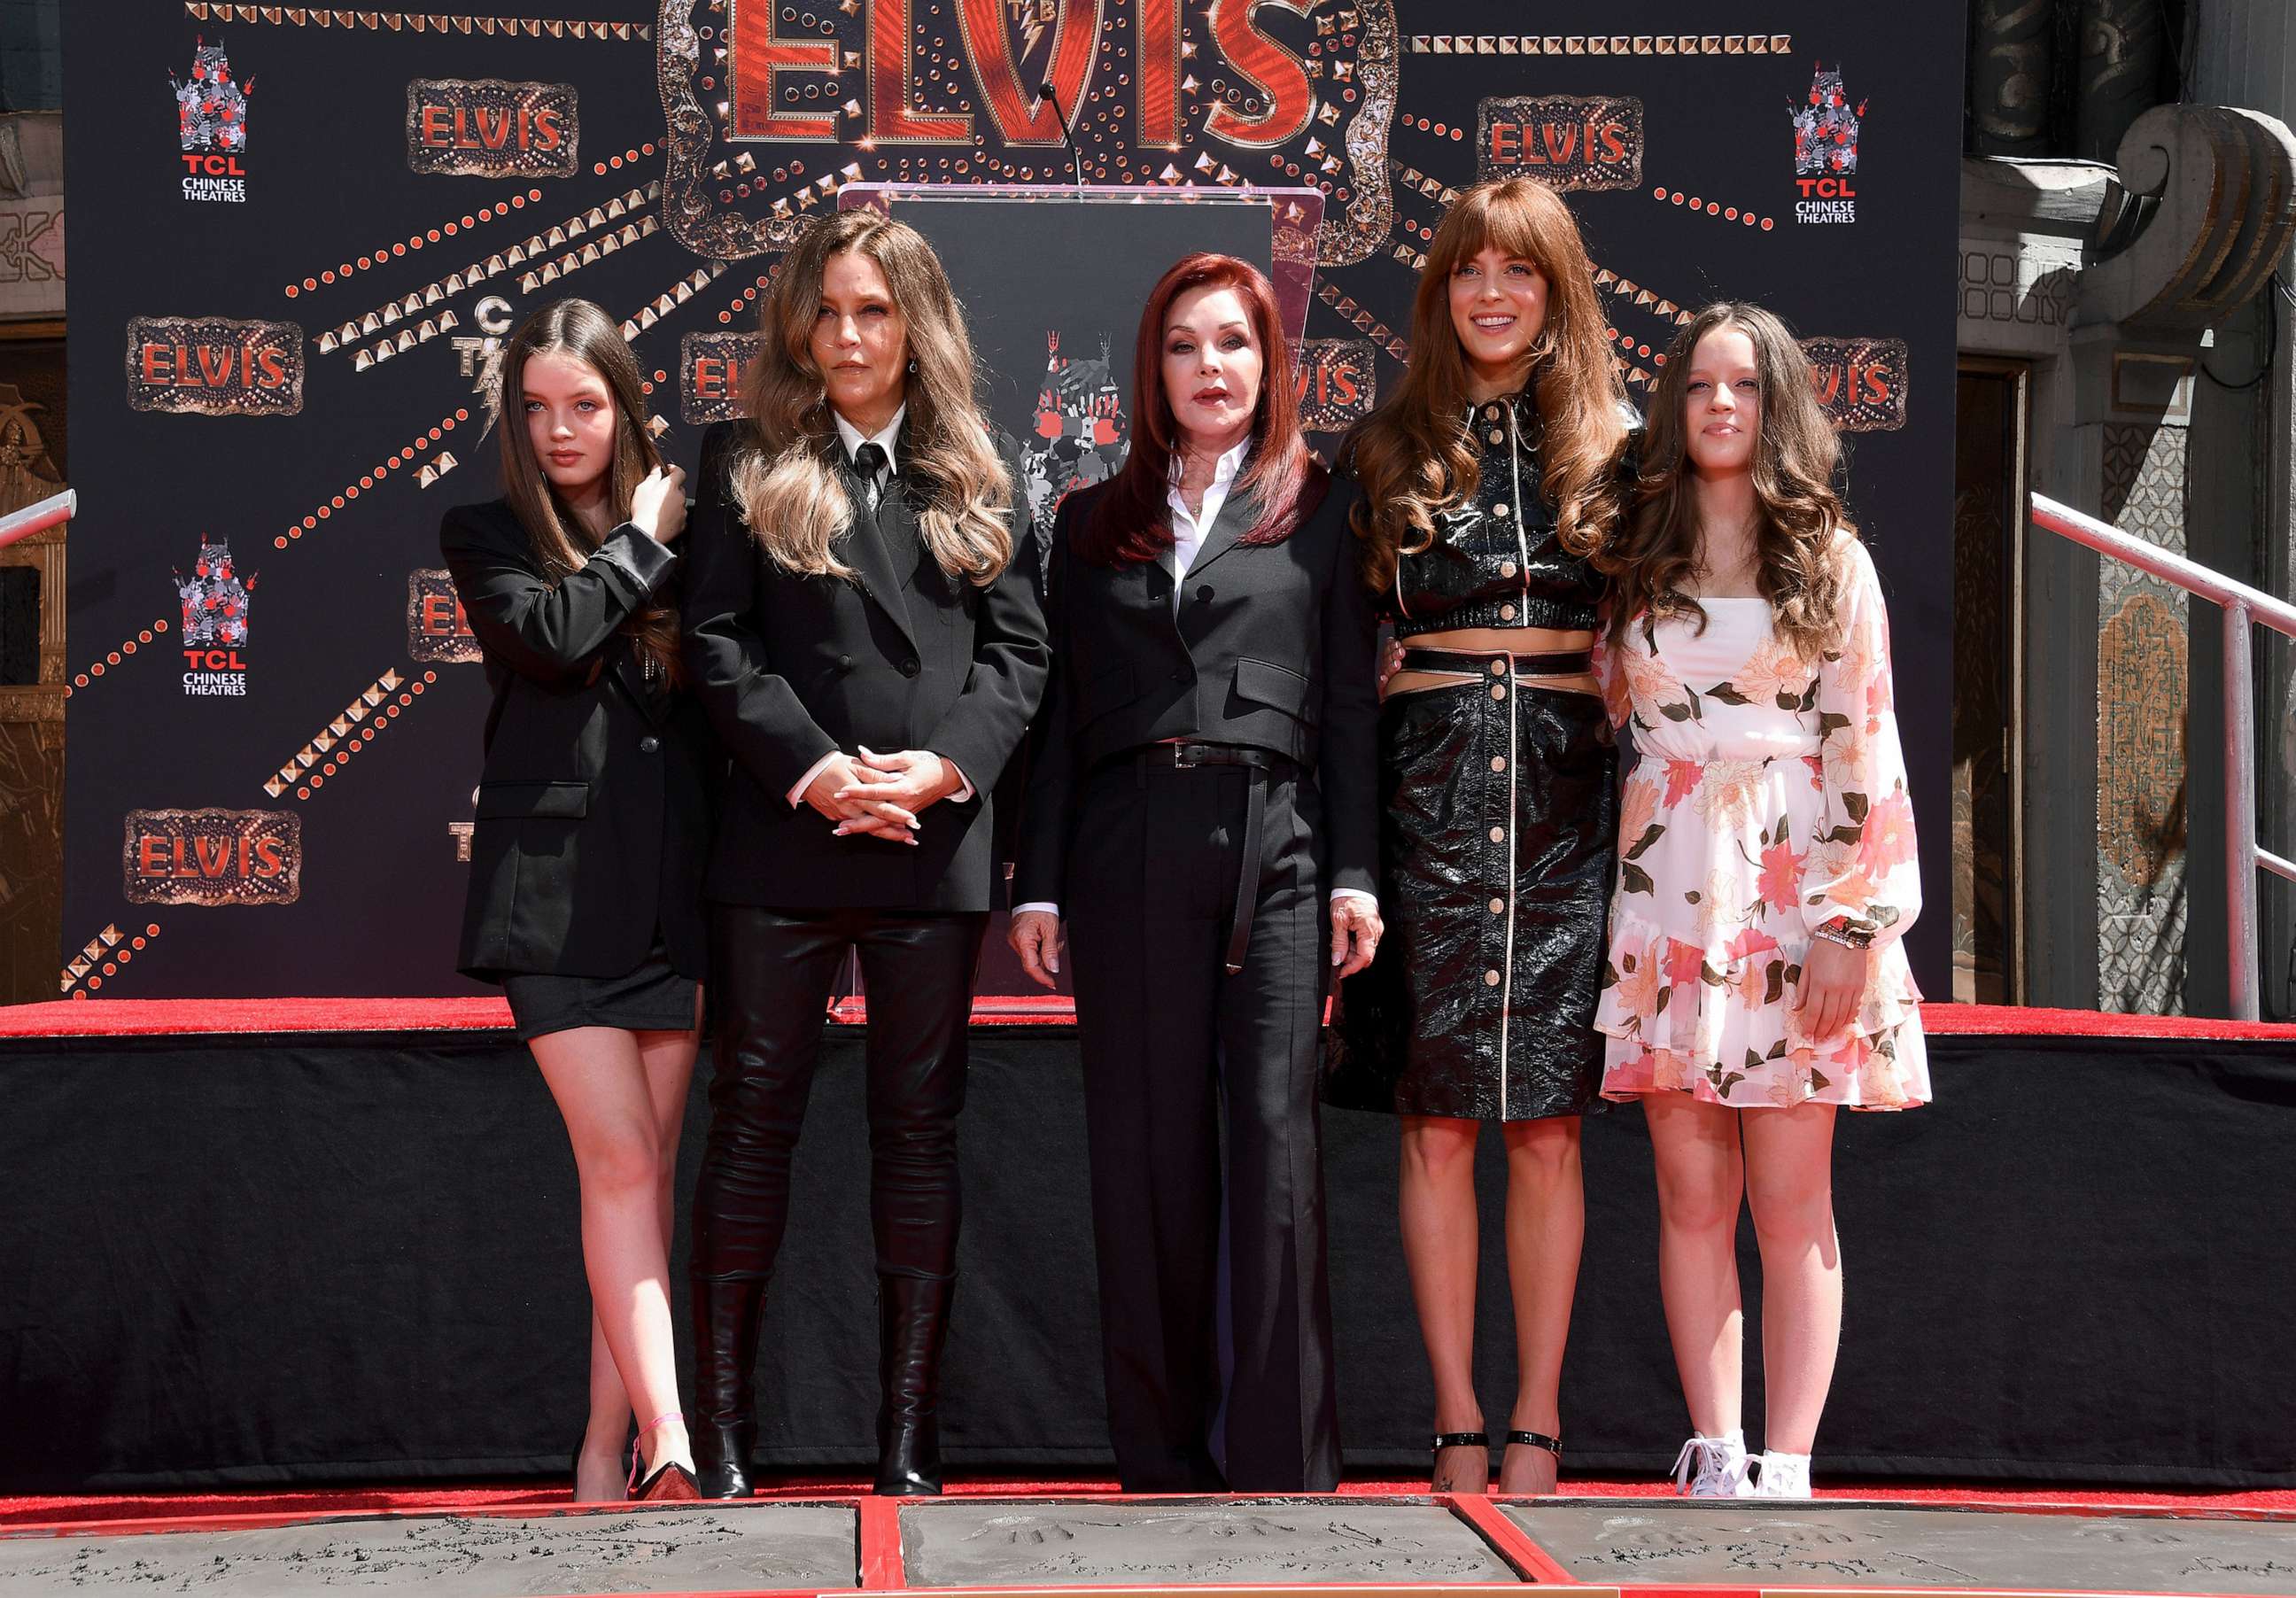 PHOTO: (L-R) Harper Vivienne Ann Lockwood, Lisa Marie Presley, Priscilla Presley, Riley Keough, and Finley Aaron Love Lockwood attend the Handprint Ceremony at TCL Chinese Theatre, June 21, 2022, in Hollywood, Calif.